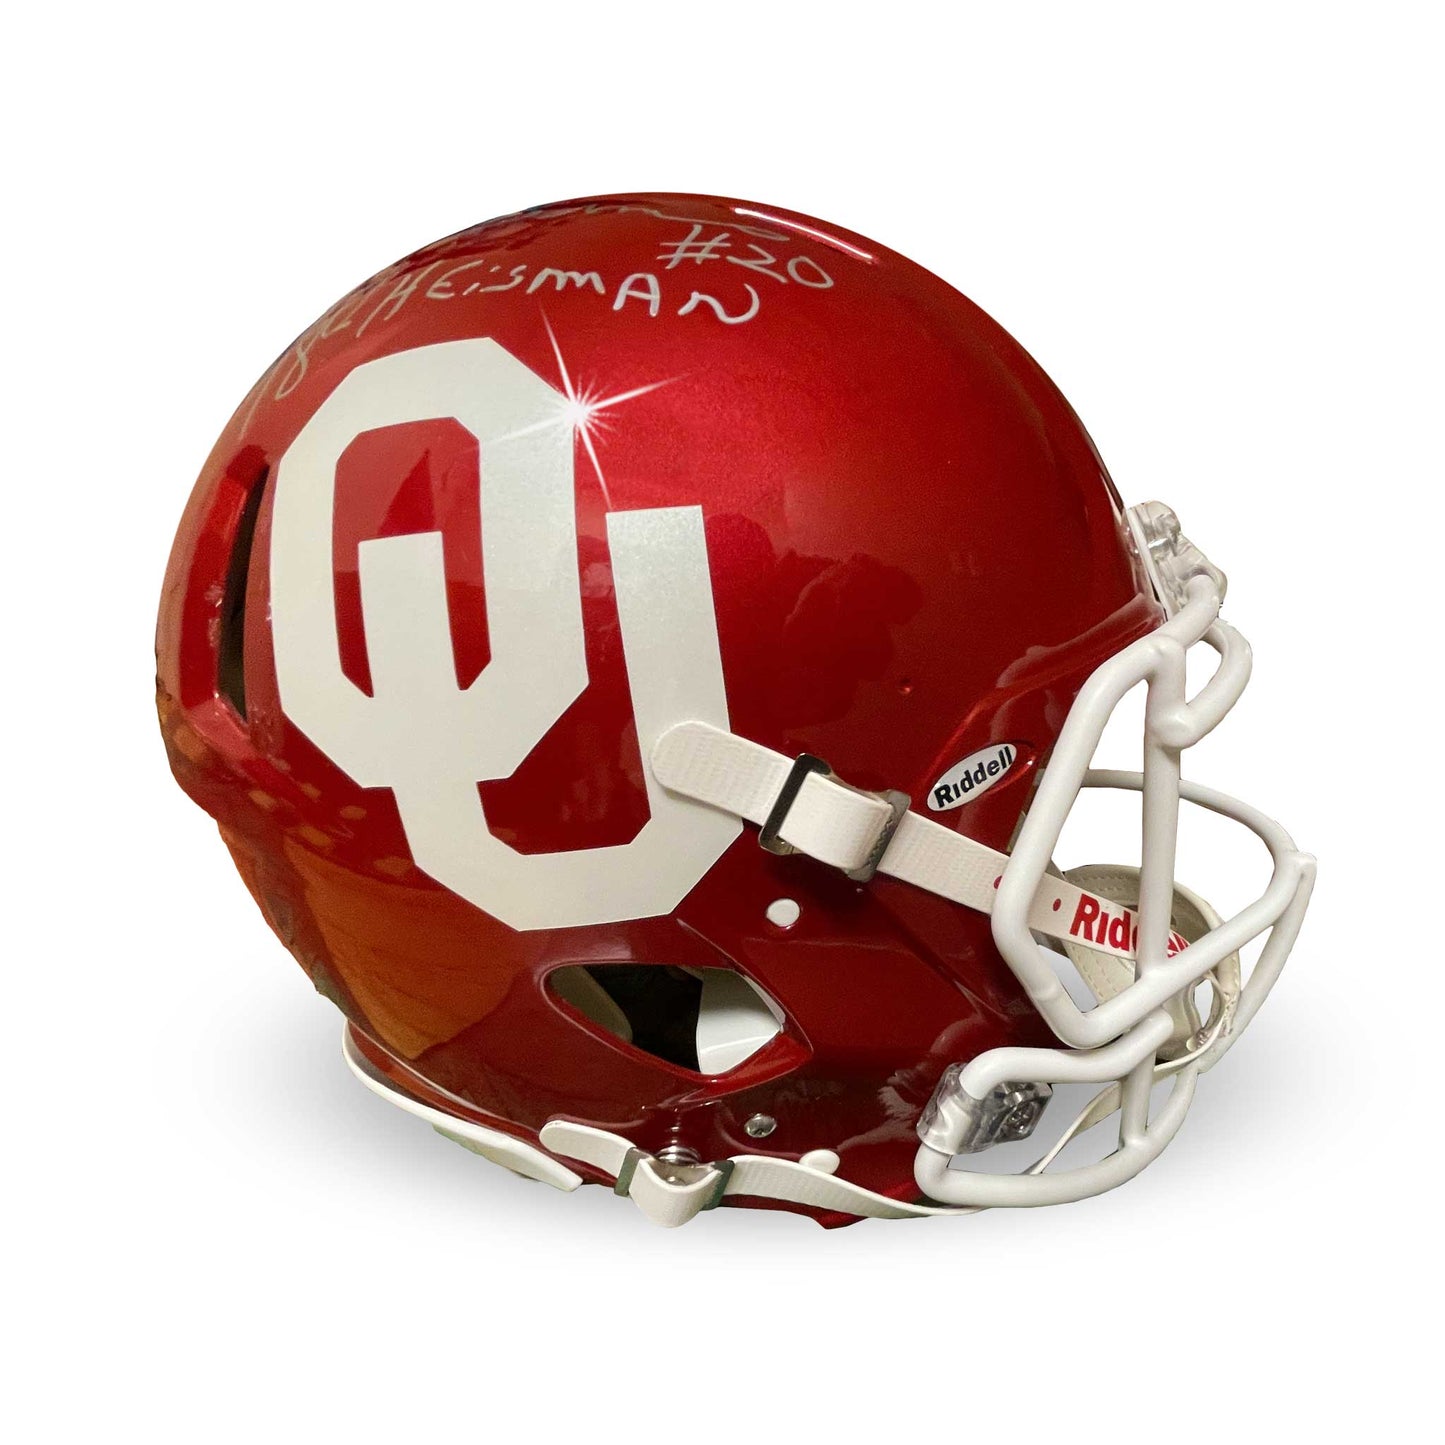 Full-Size Authentic OU Helmet Signed By Billy Sims